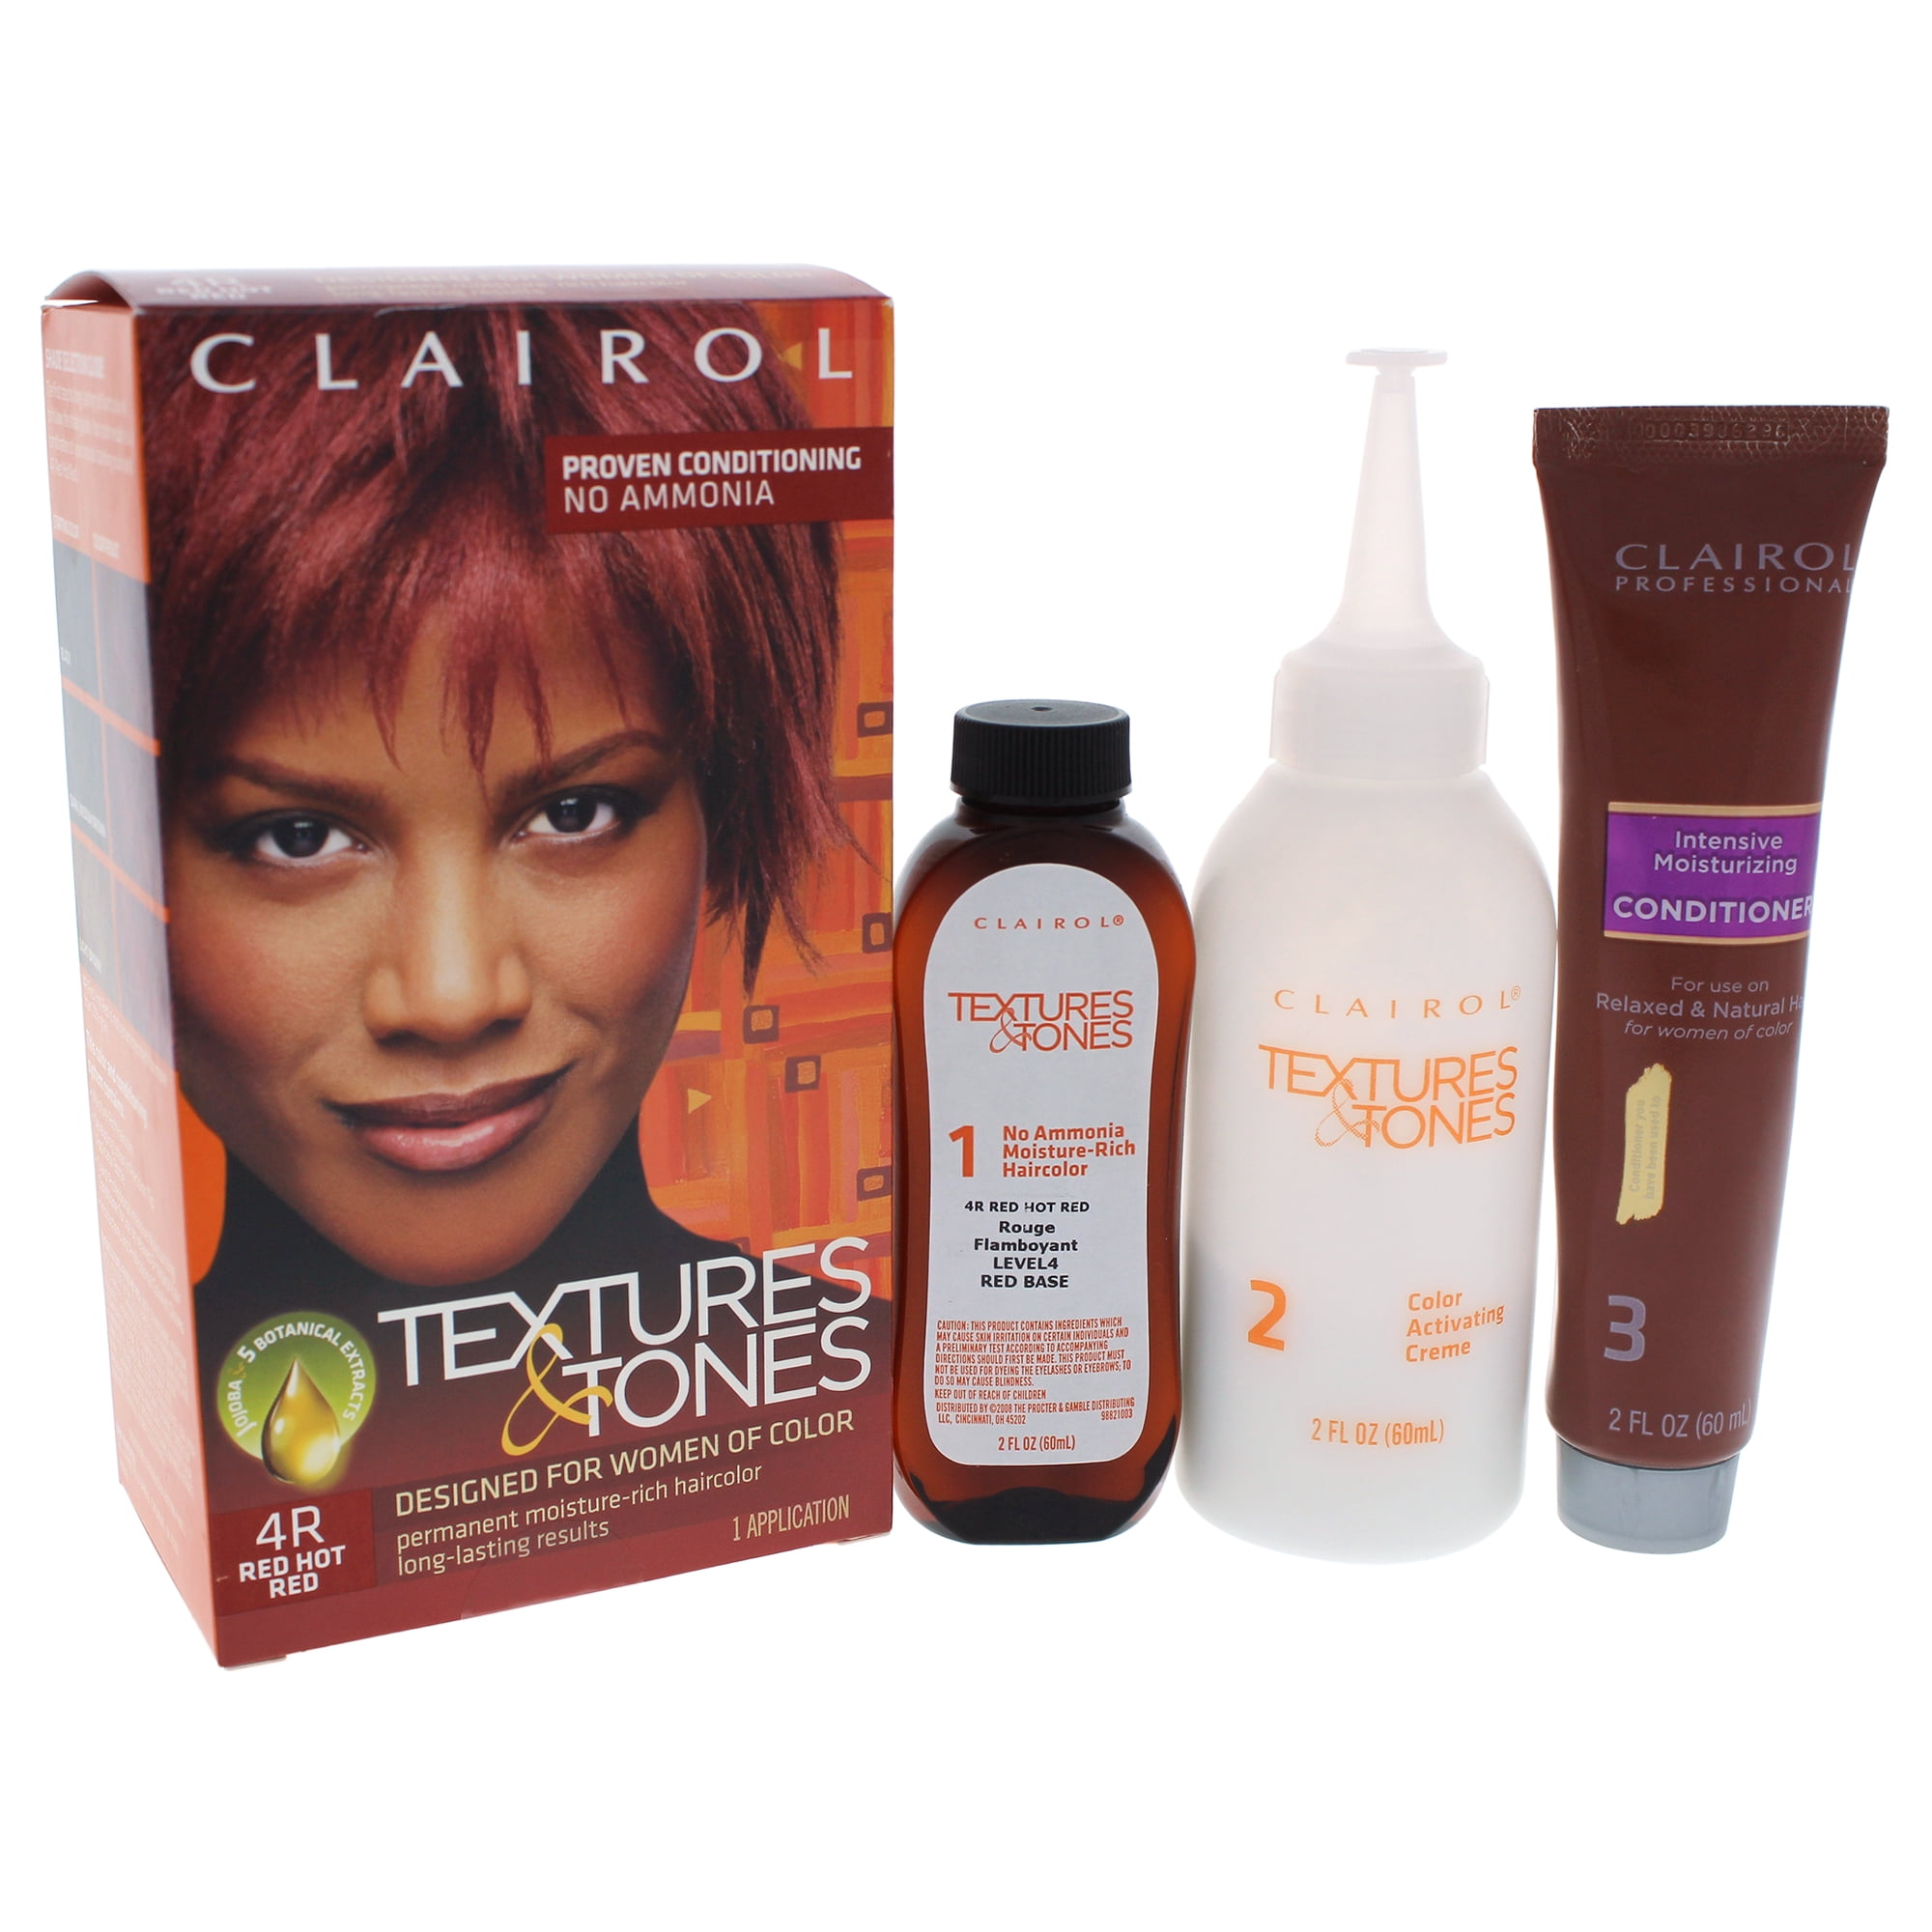 Textures and Tones Permanent Moisture-Rich Haircolor - # 4R Red Hot Red by  Clairol for Women - 1 Appl 